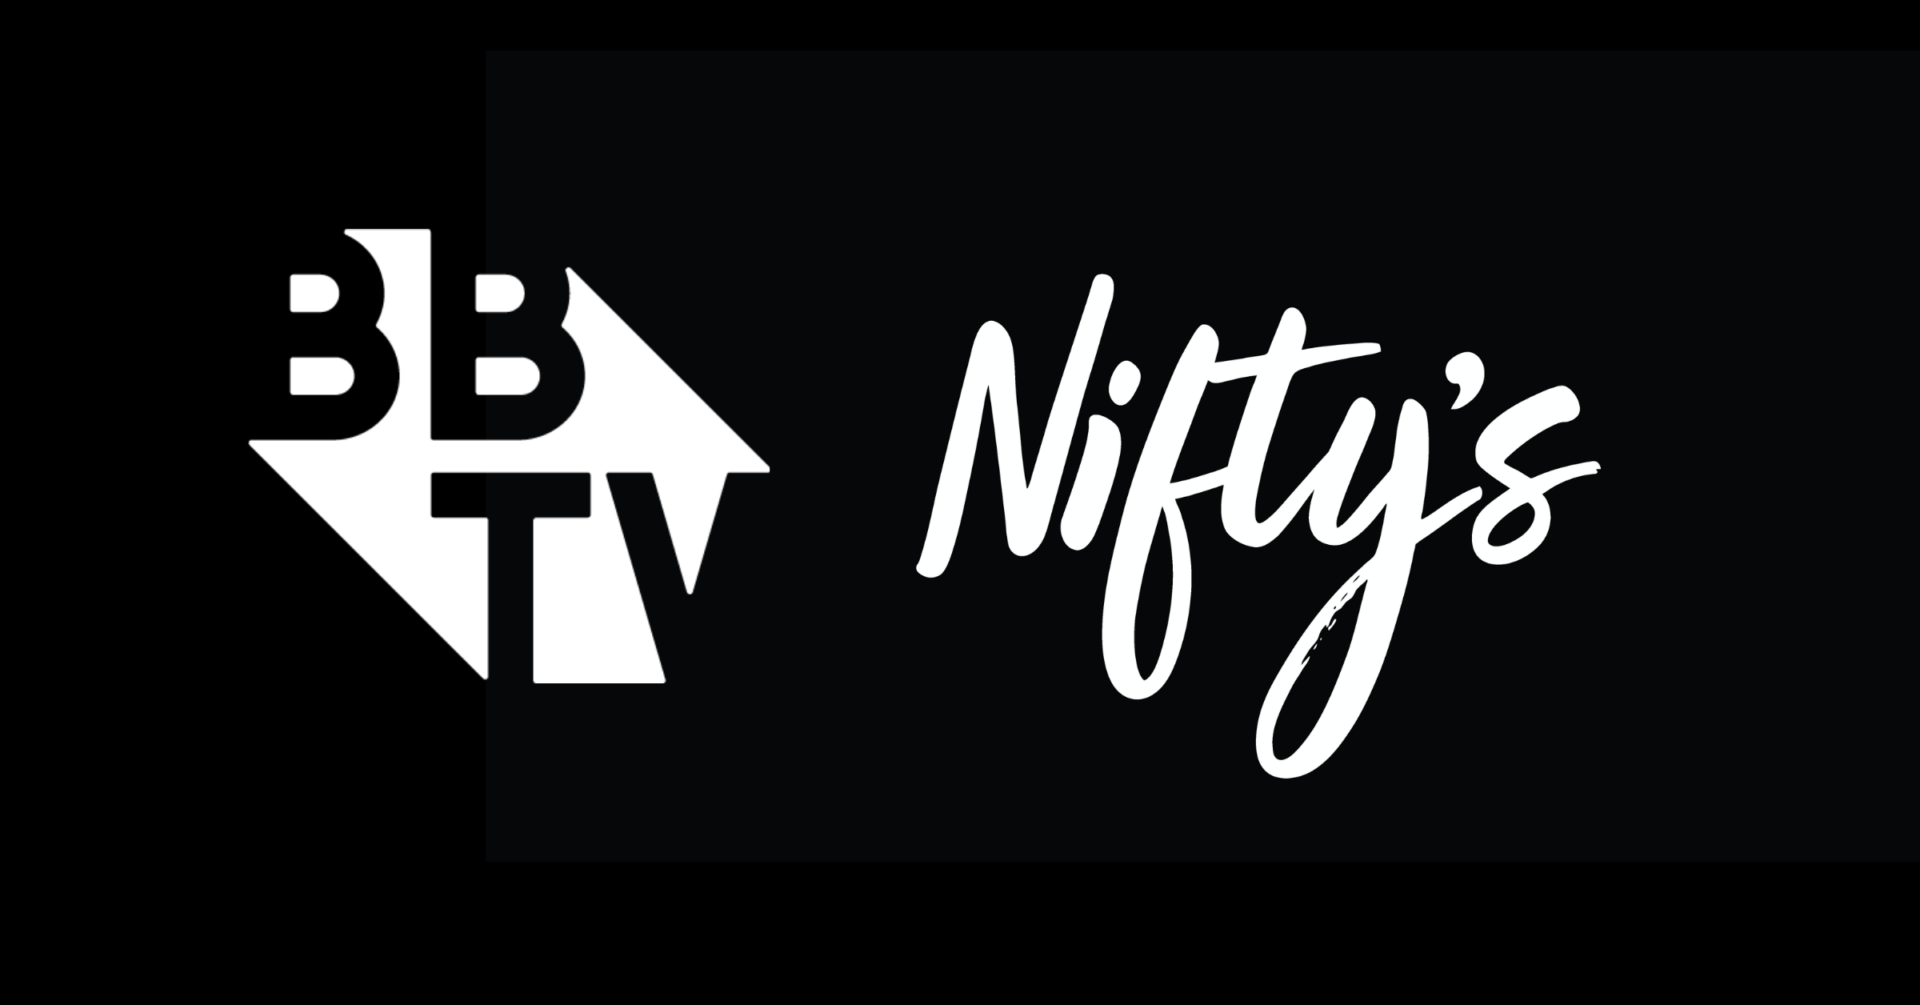 BBTV Makes Strategic Investment and Forms Strategic Partnership with Social NFT Platform Nifty’s Inc. to Create New Revenue Streams for Creators